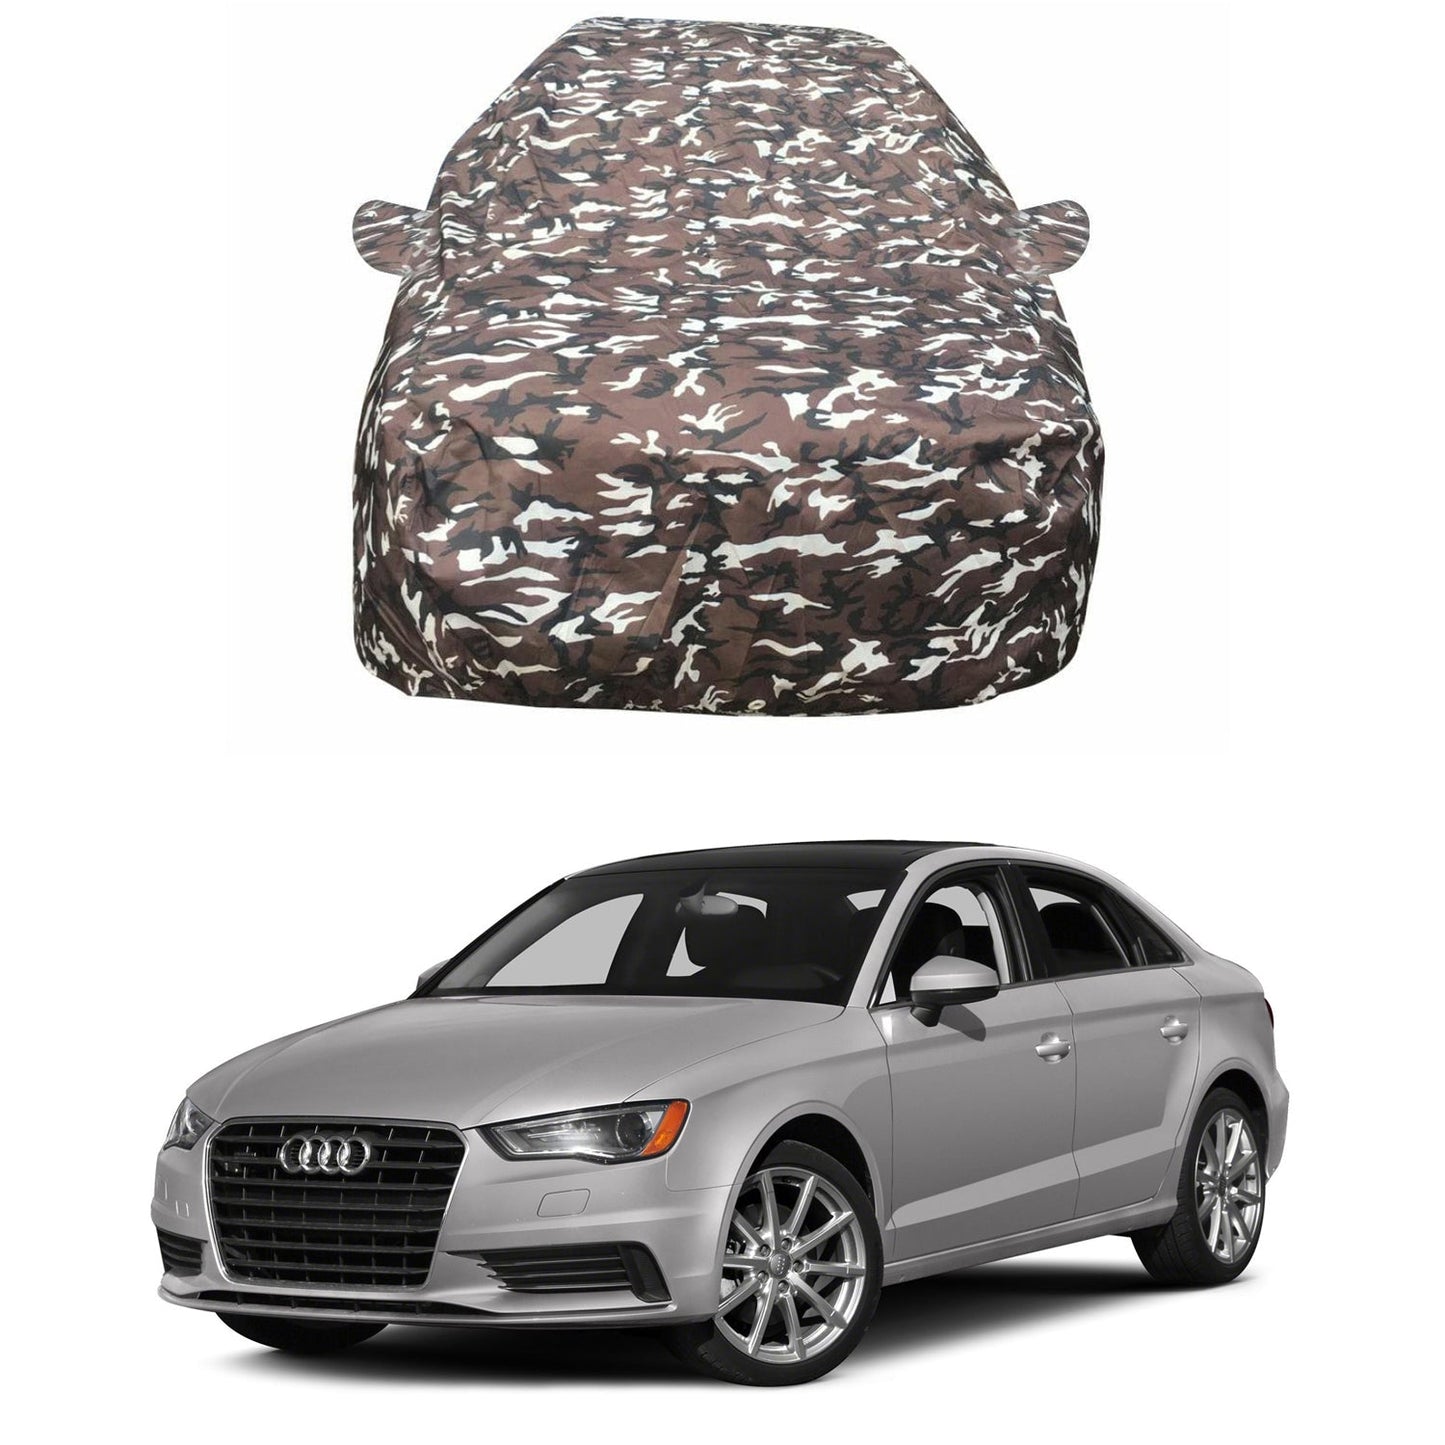 Oshotto Ranger Design Made of 100% Waterproof Fabric Car Body Cover with Mirror Pockets For Audi A3